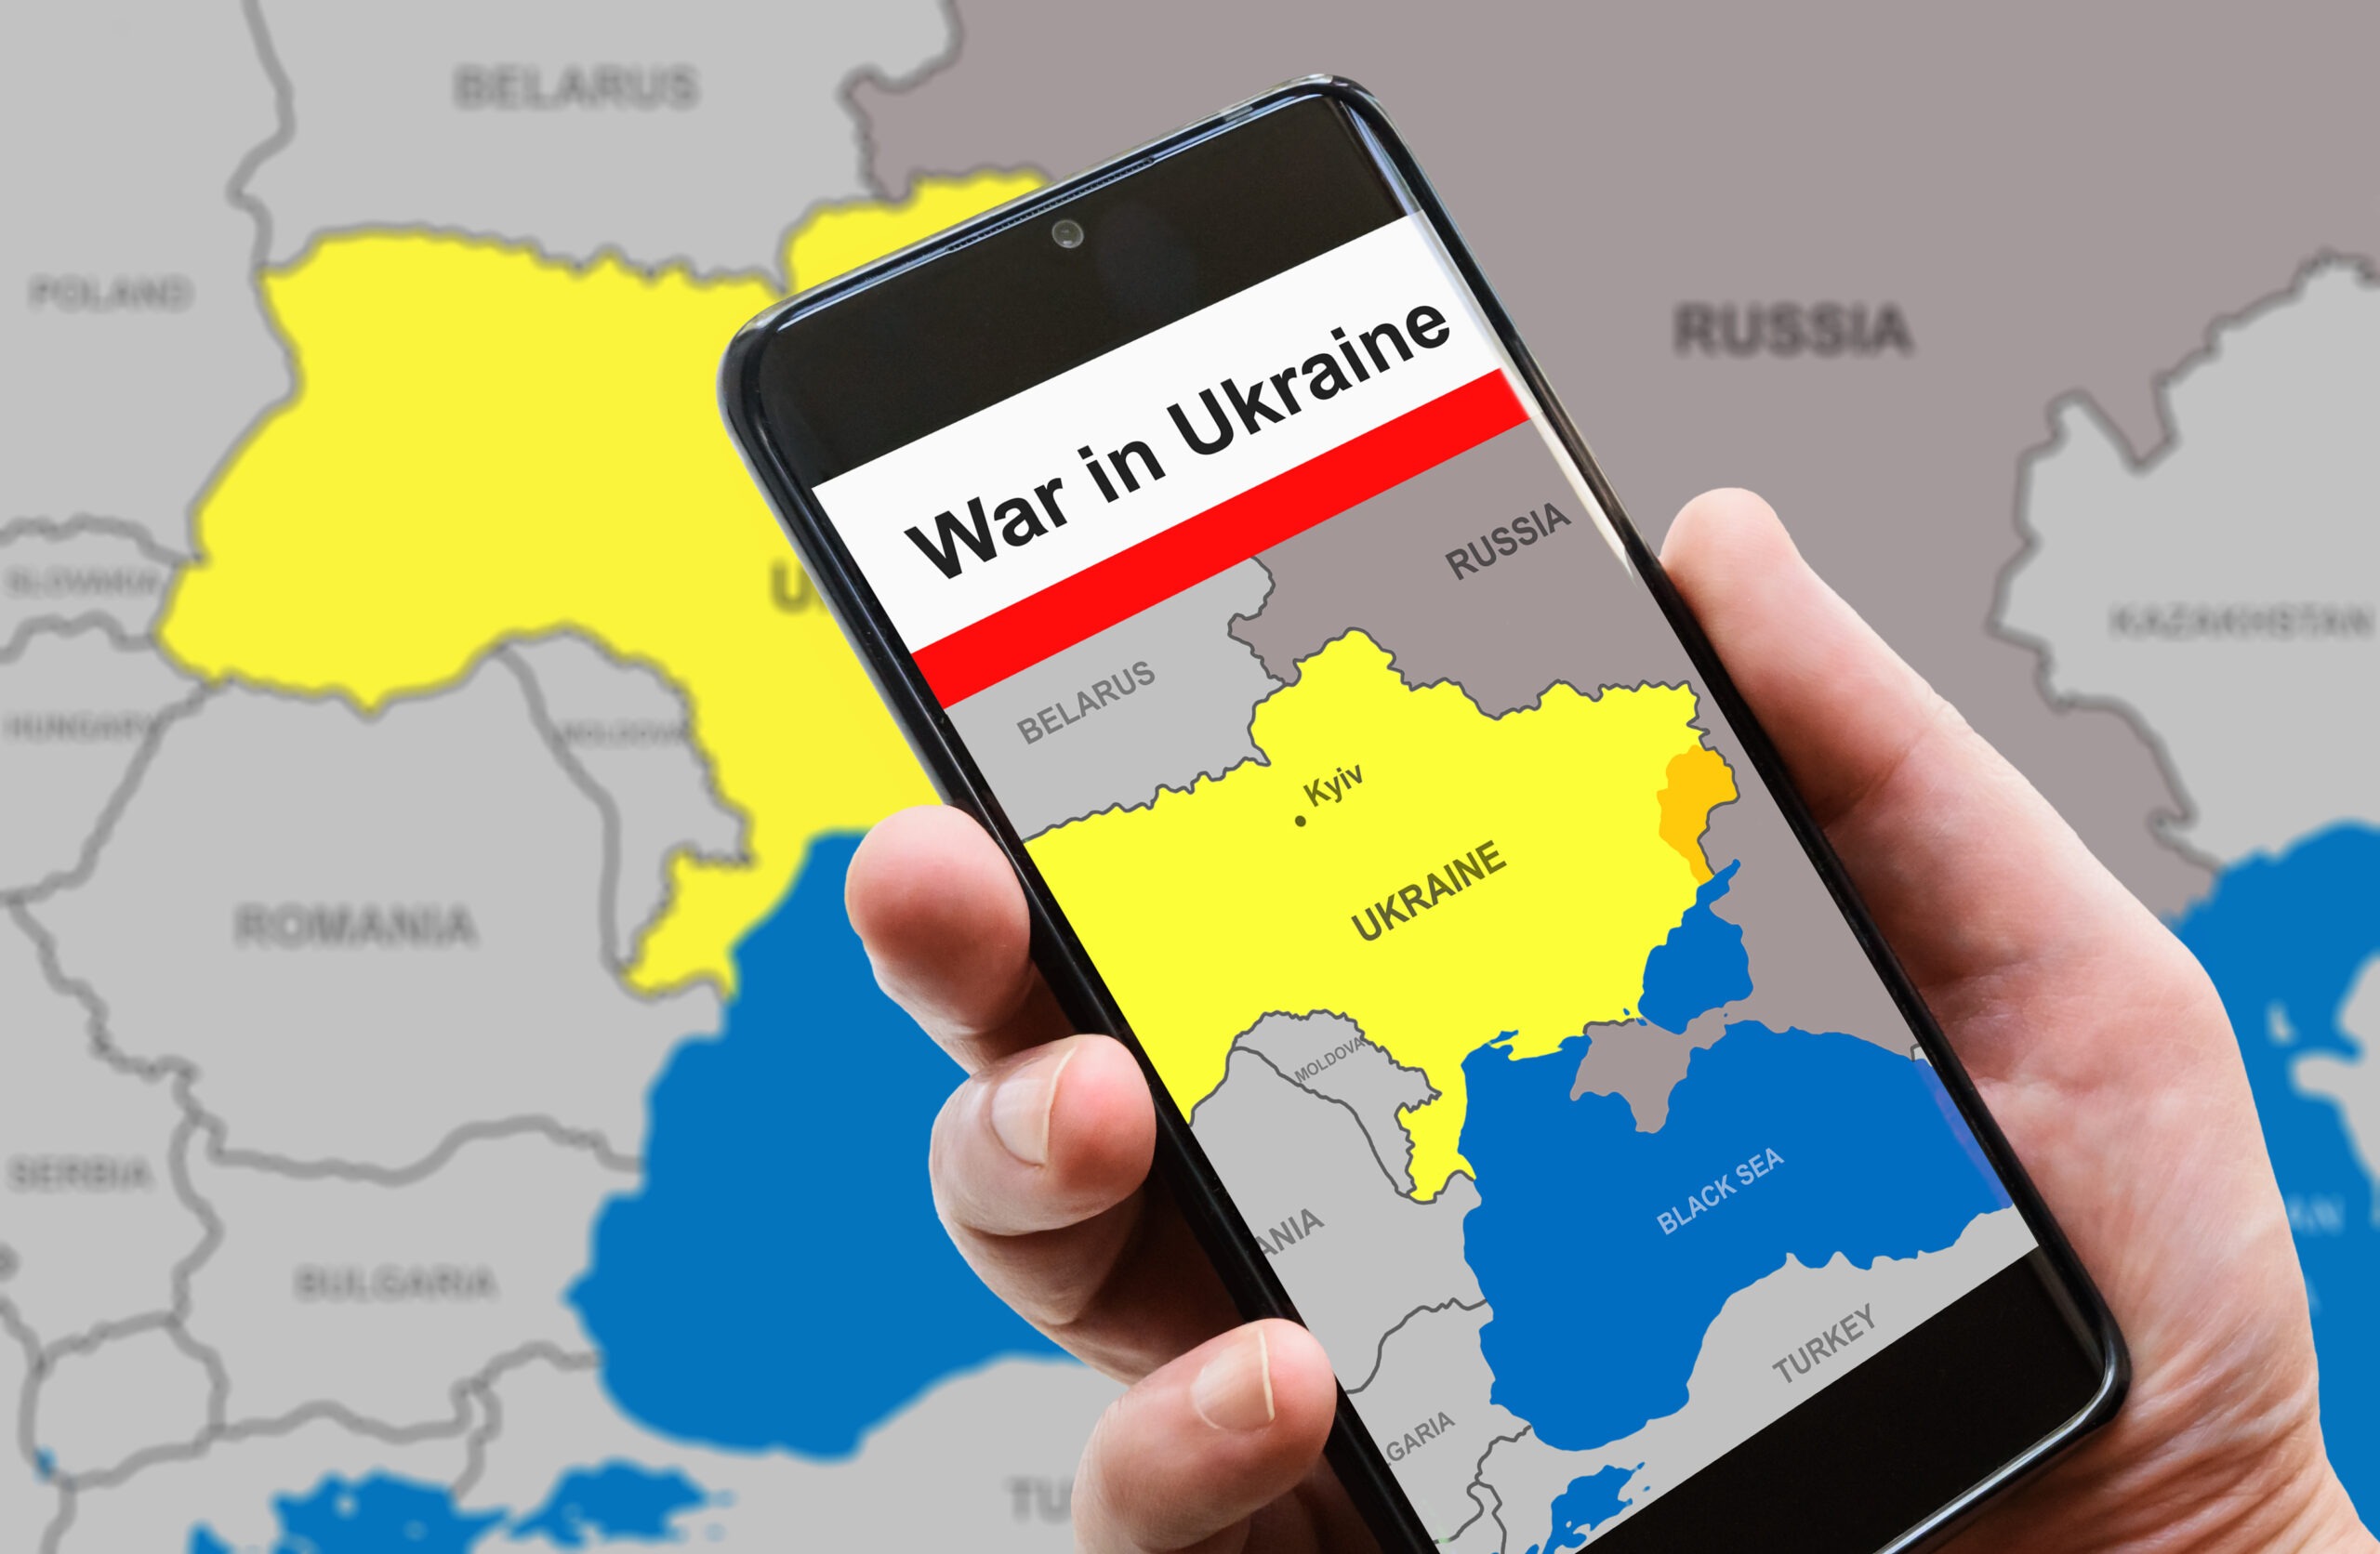 War in Ukraine on mobile phone screen. Ukraine and Russia borders with Donbass on Europe map. Ukrainian-Russian conflict in smartphone. Concept of media, news, refugees, politics and crisis.